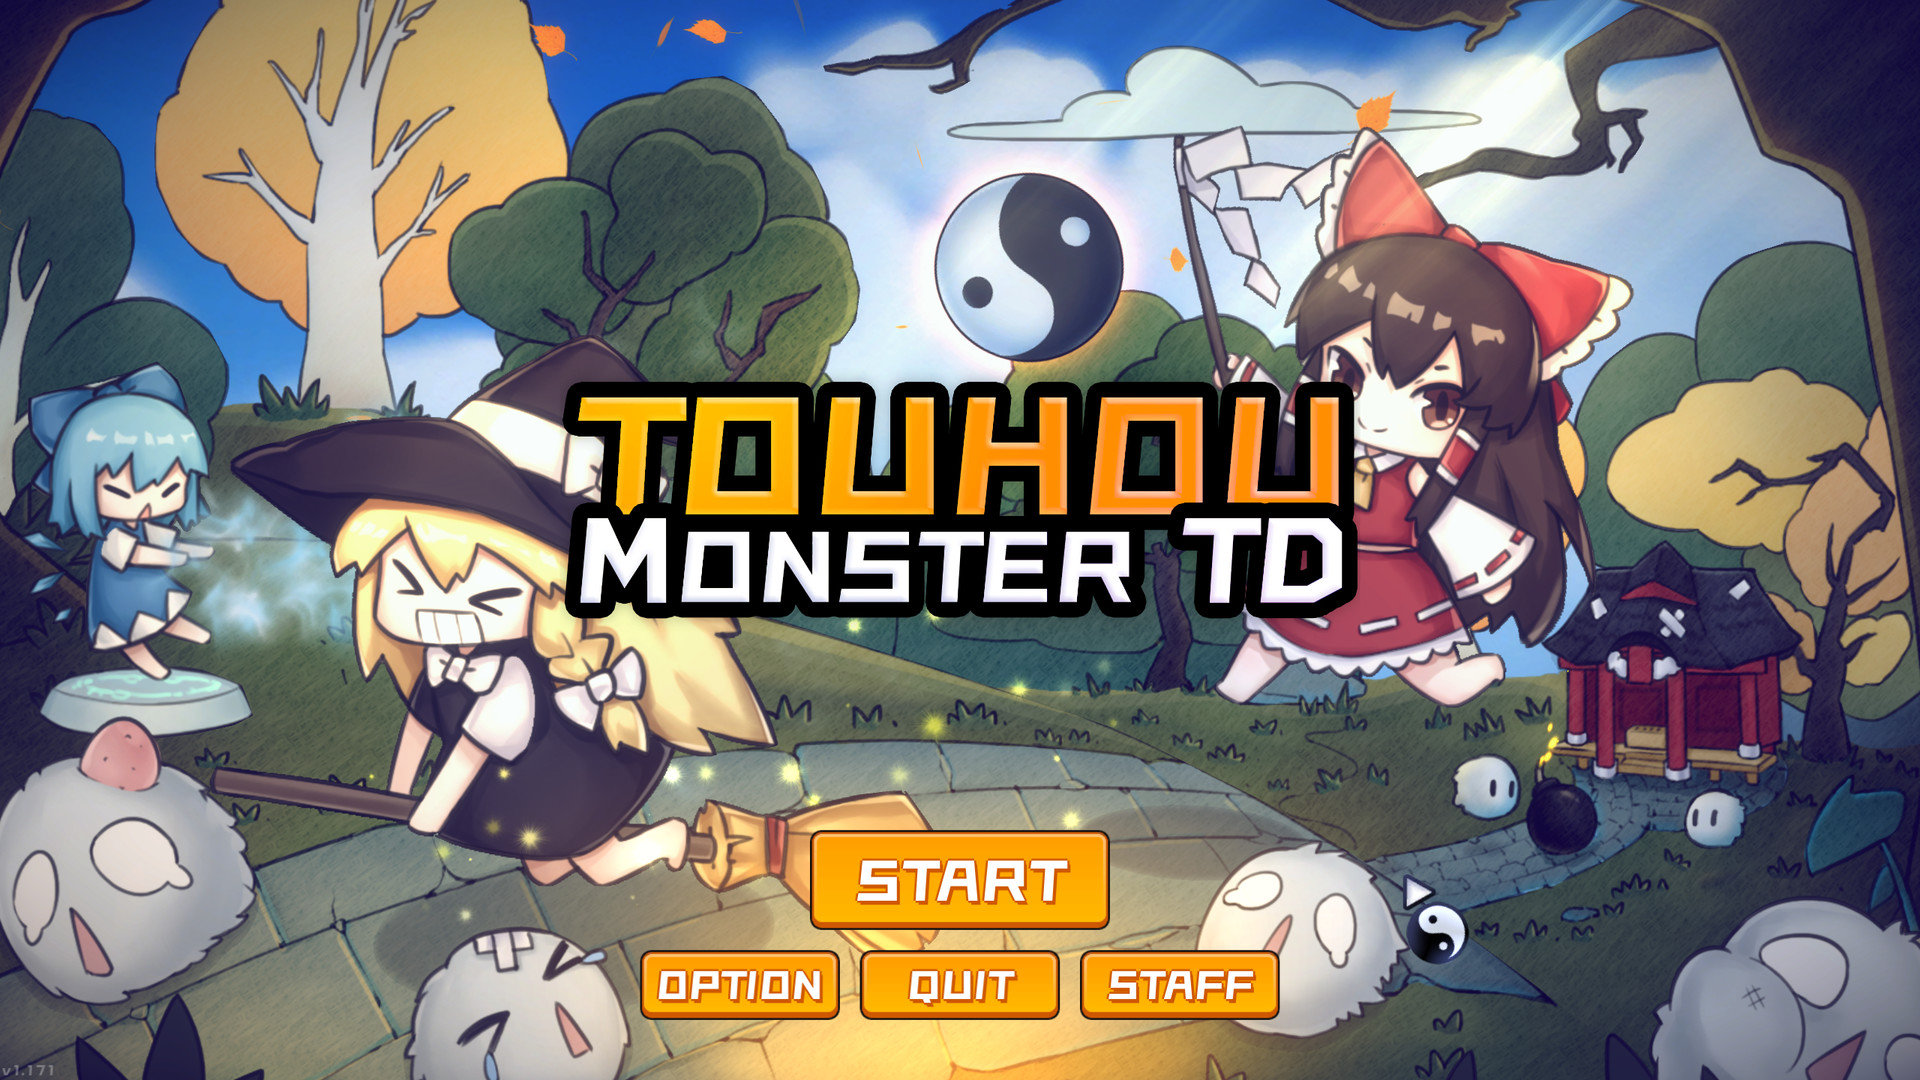 Find the best laptops for Touhou Monster TD ~ 幻想乡妖怪塔防